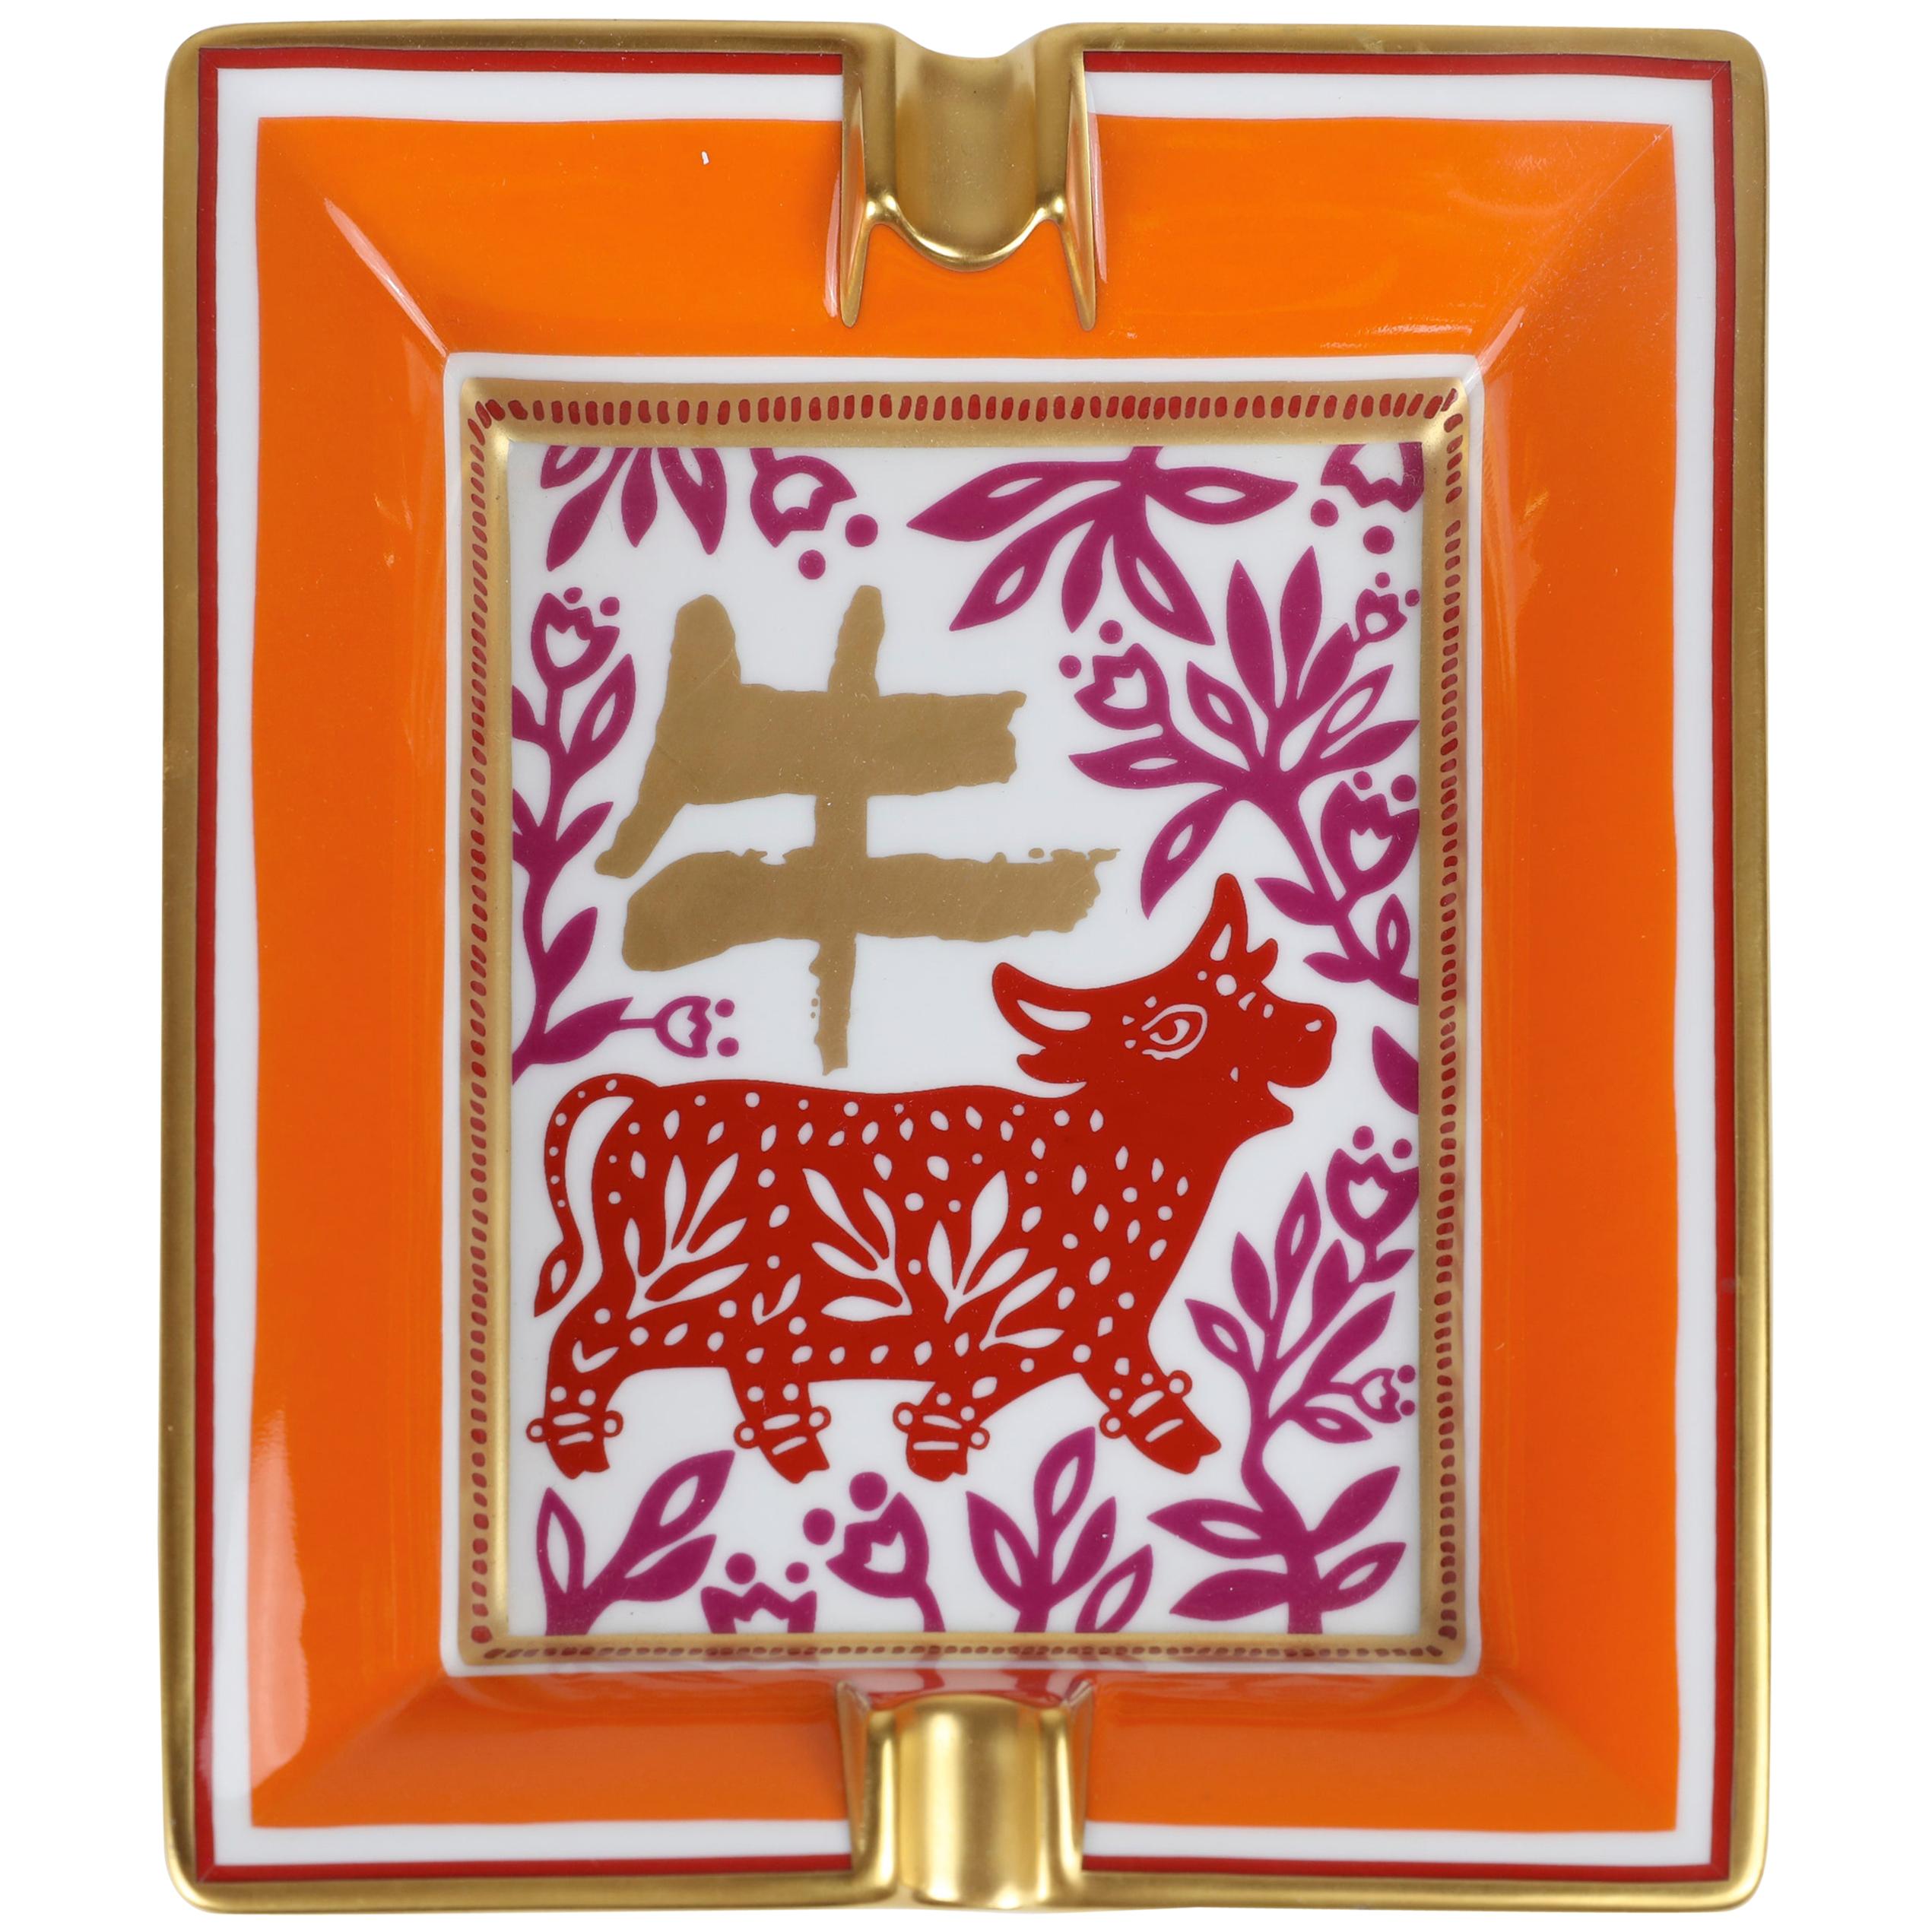 Hermes Chinese Zodiac Ashtray, Year of the Ox